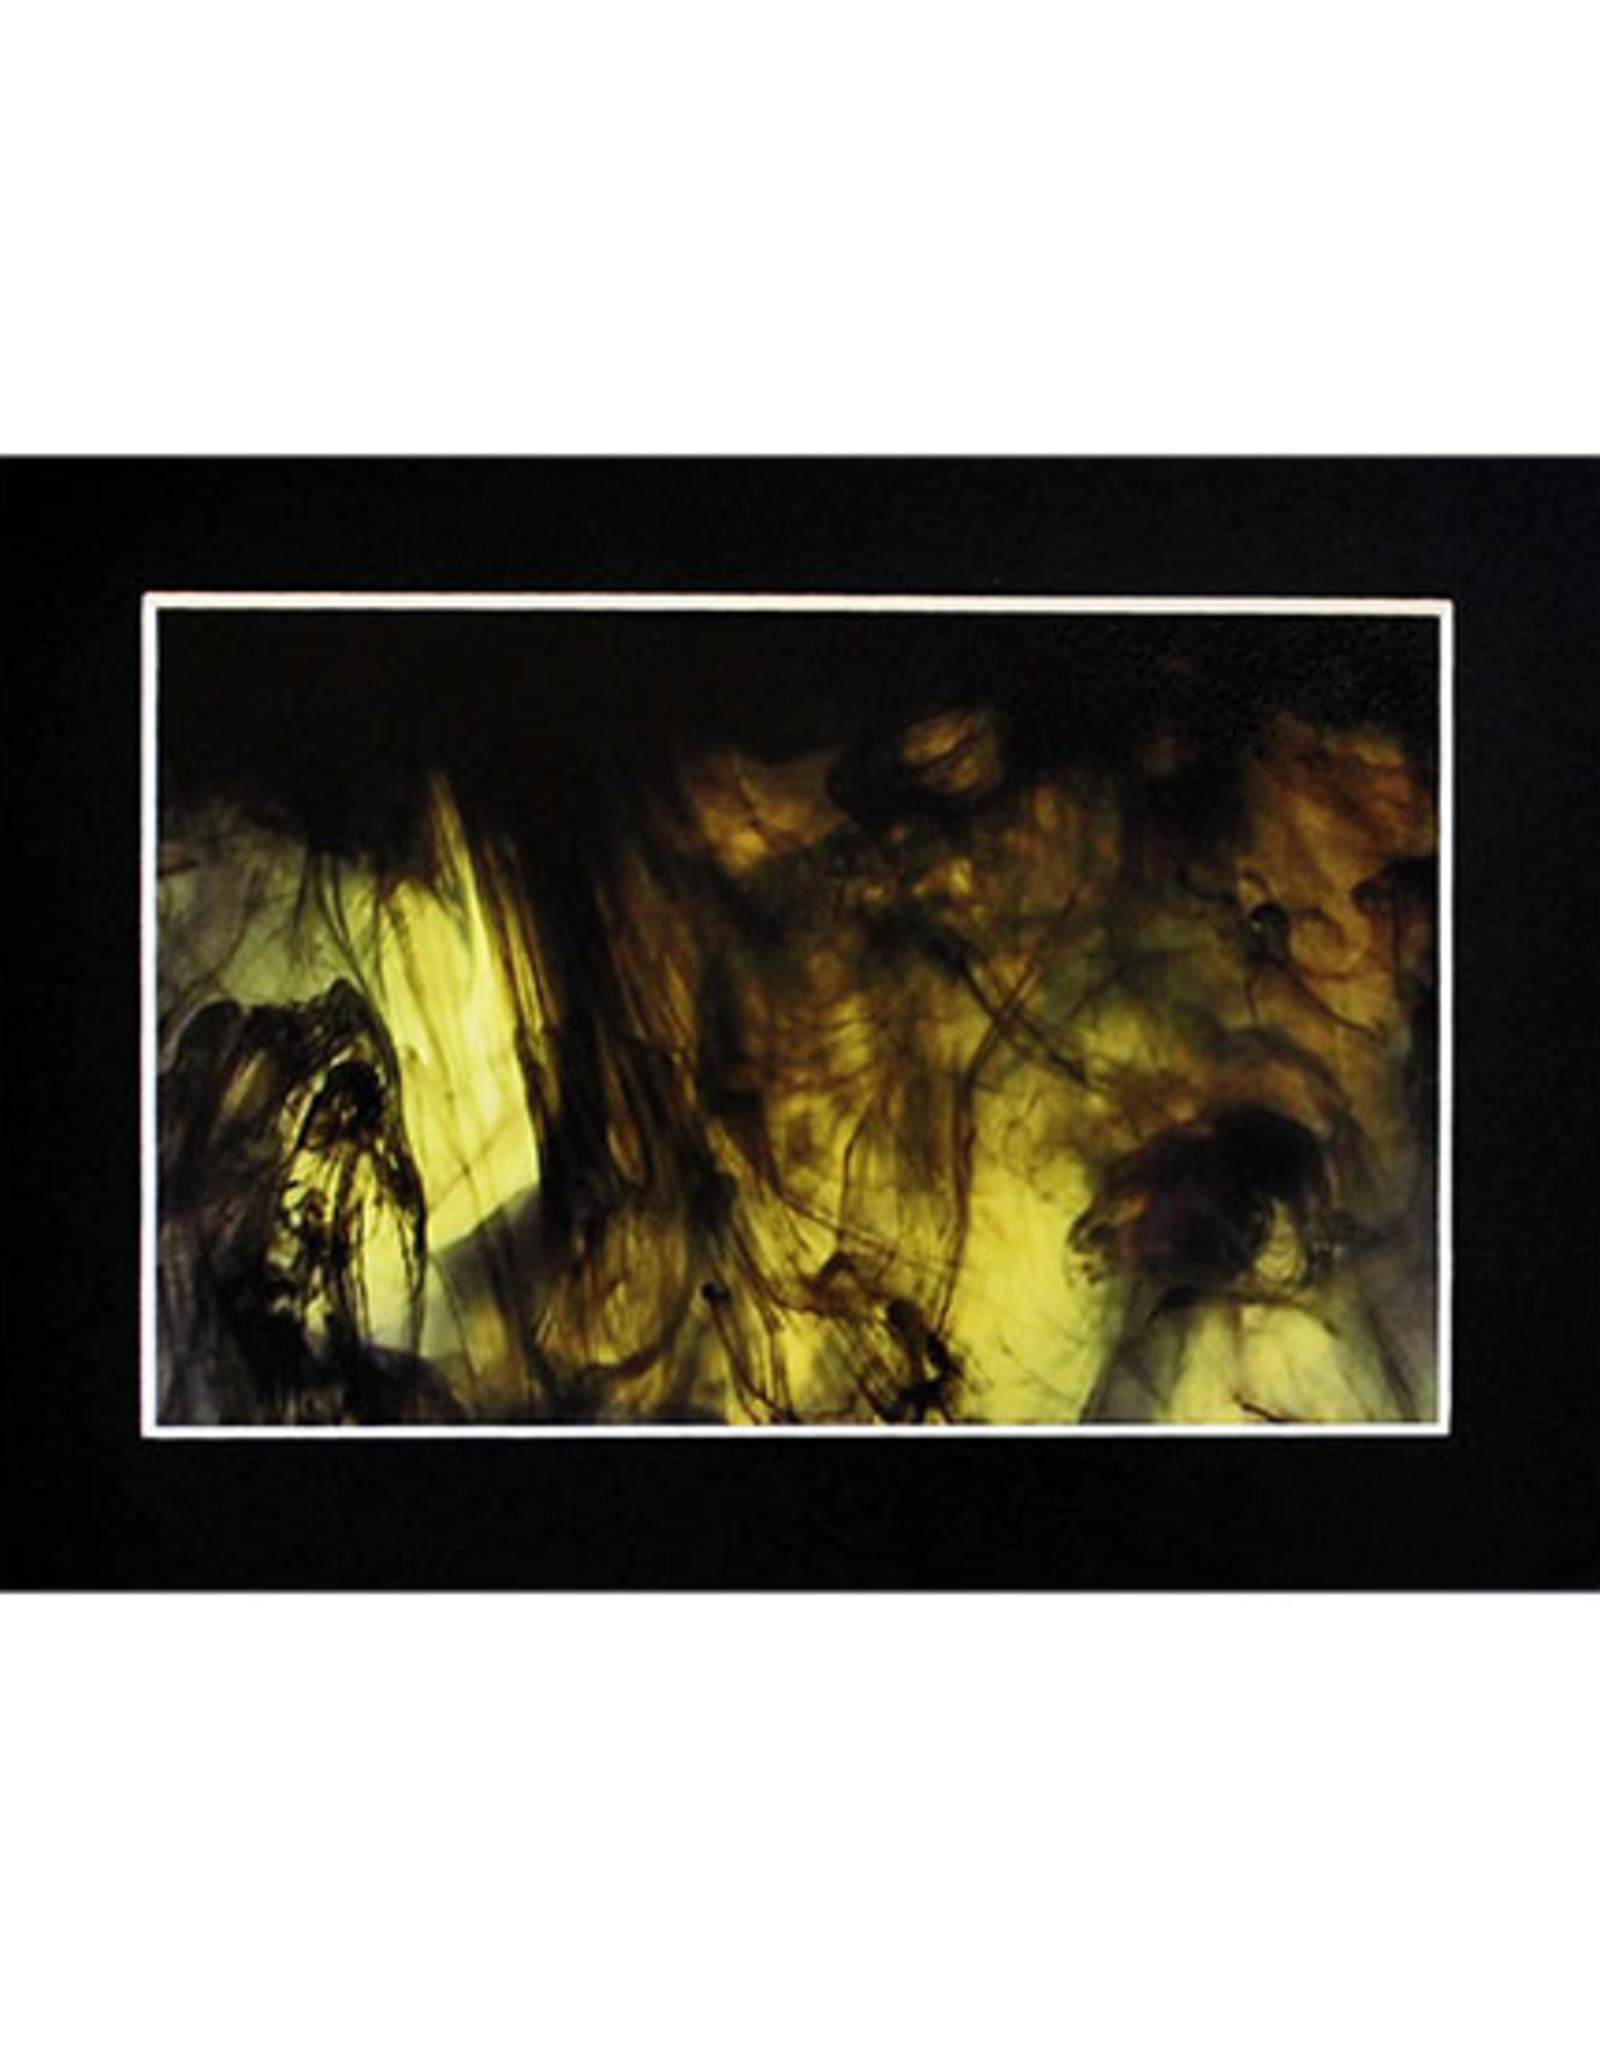 Daria Percy Untitled 2 (chartreuse) Matted 4x6 photograph by Daria Percy